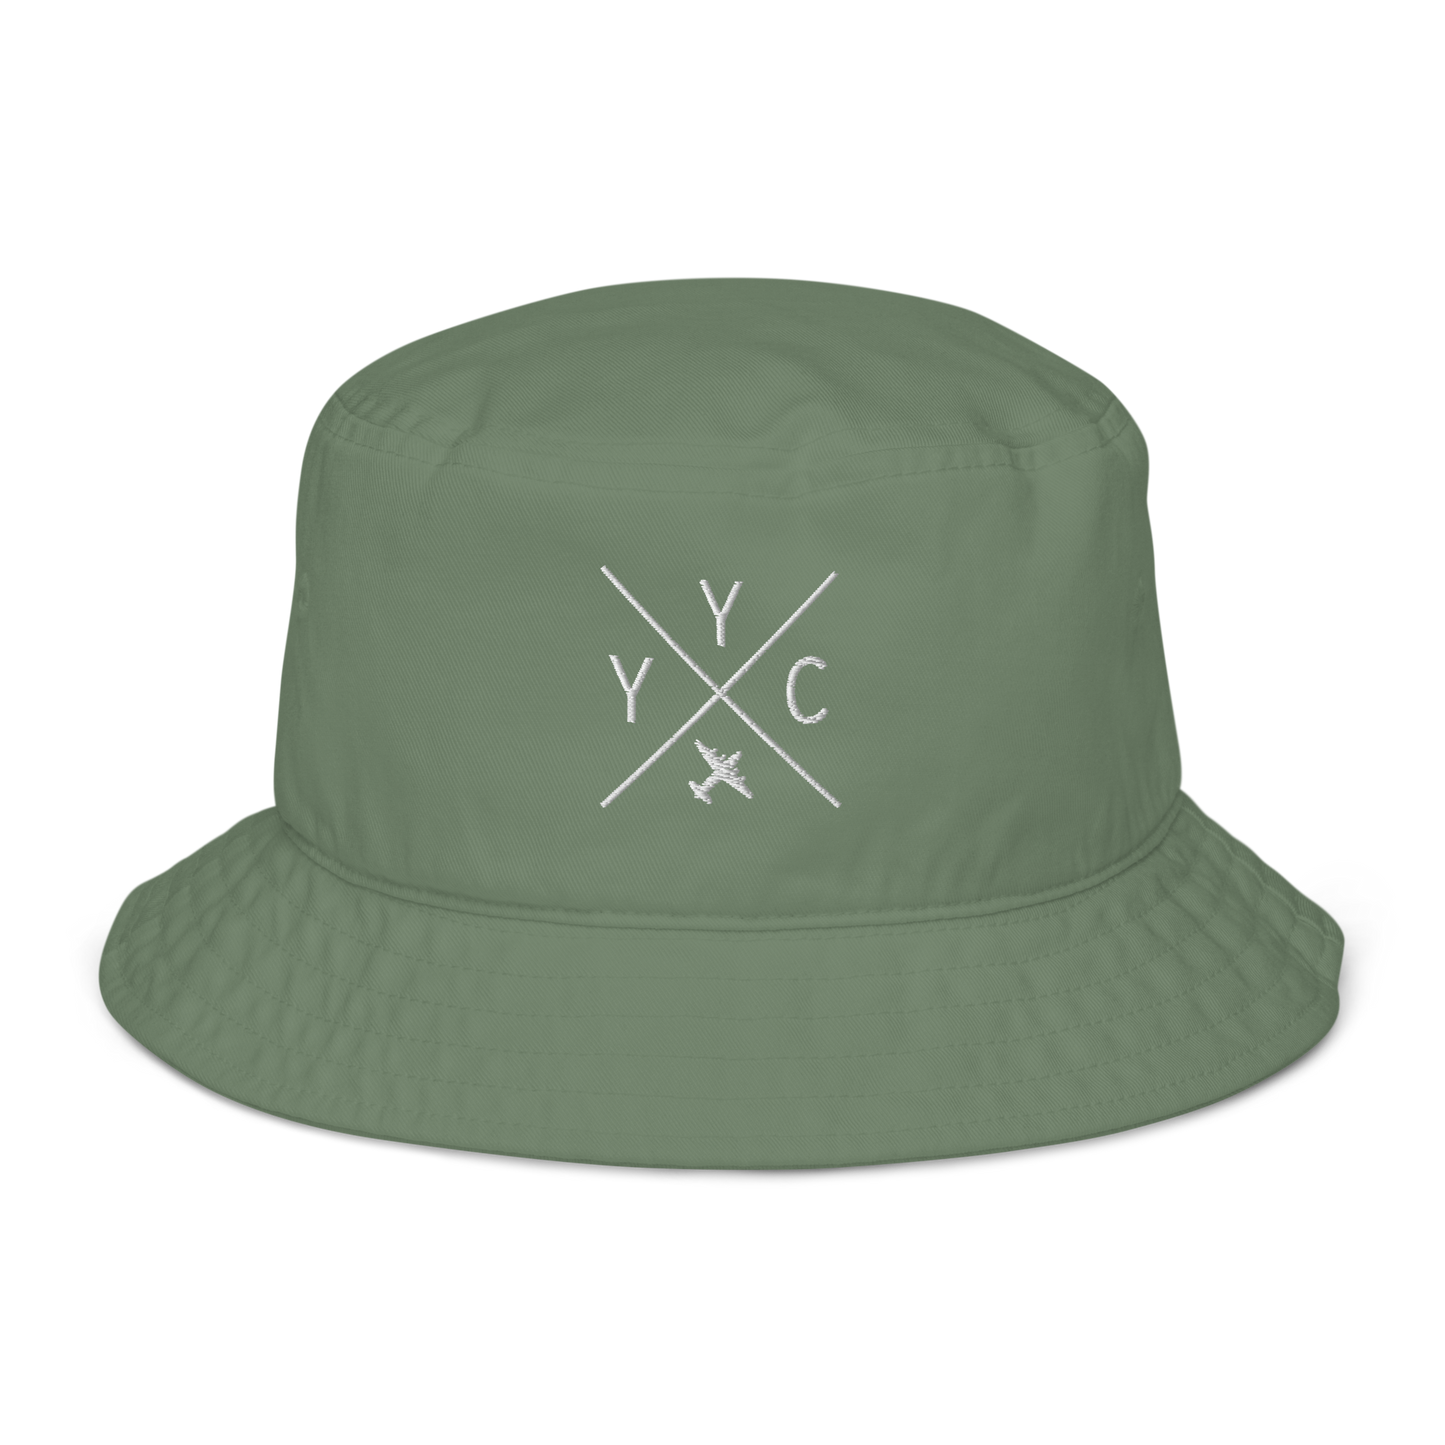 YHM Designs - YYC Calgary Organic Cotton Bucket Hat - Crossed-X Design with Airport Code and Vintage Propliner - White Embroidery - Image 06